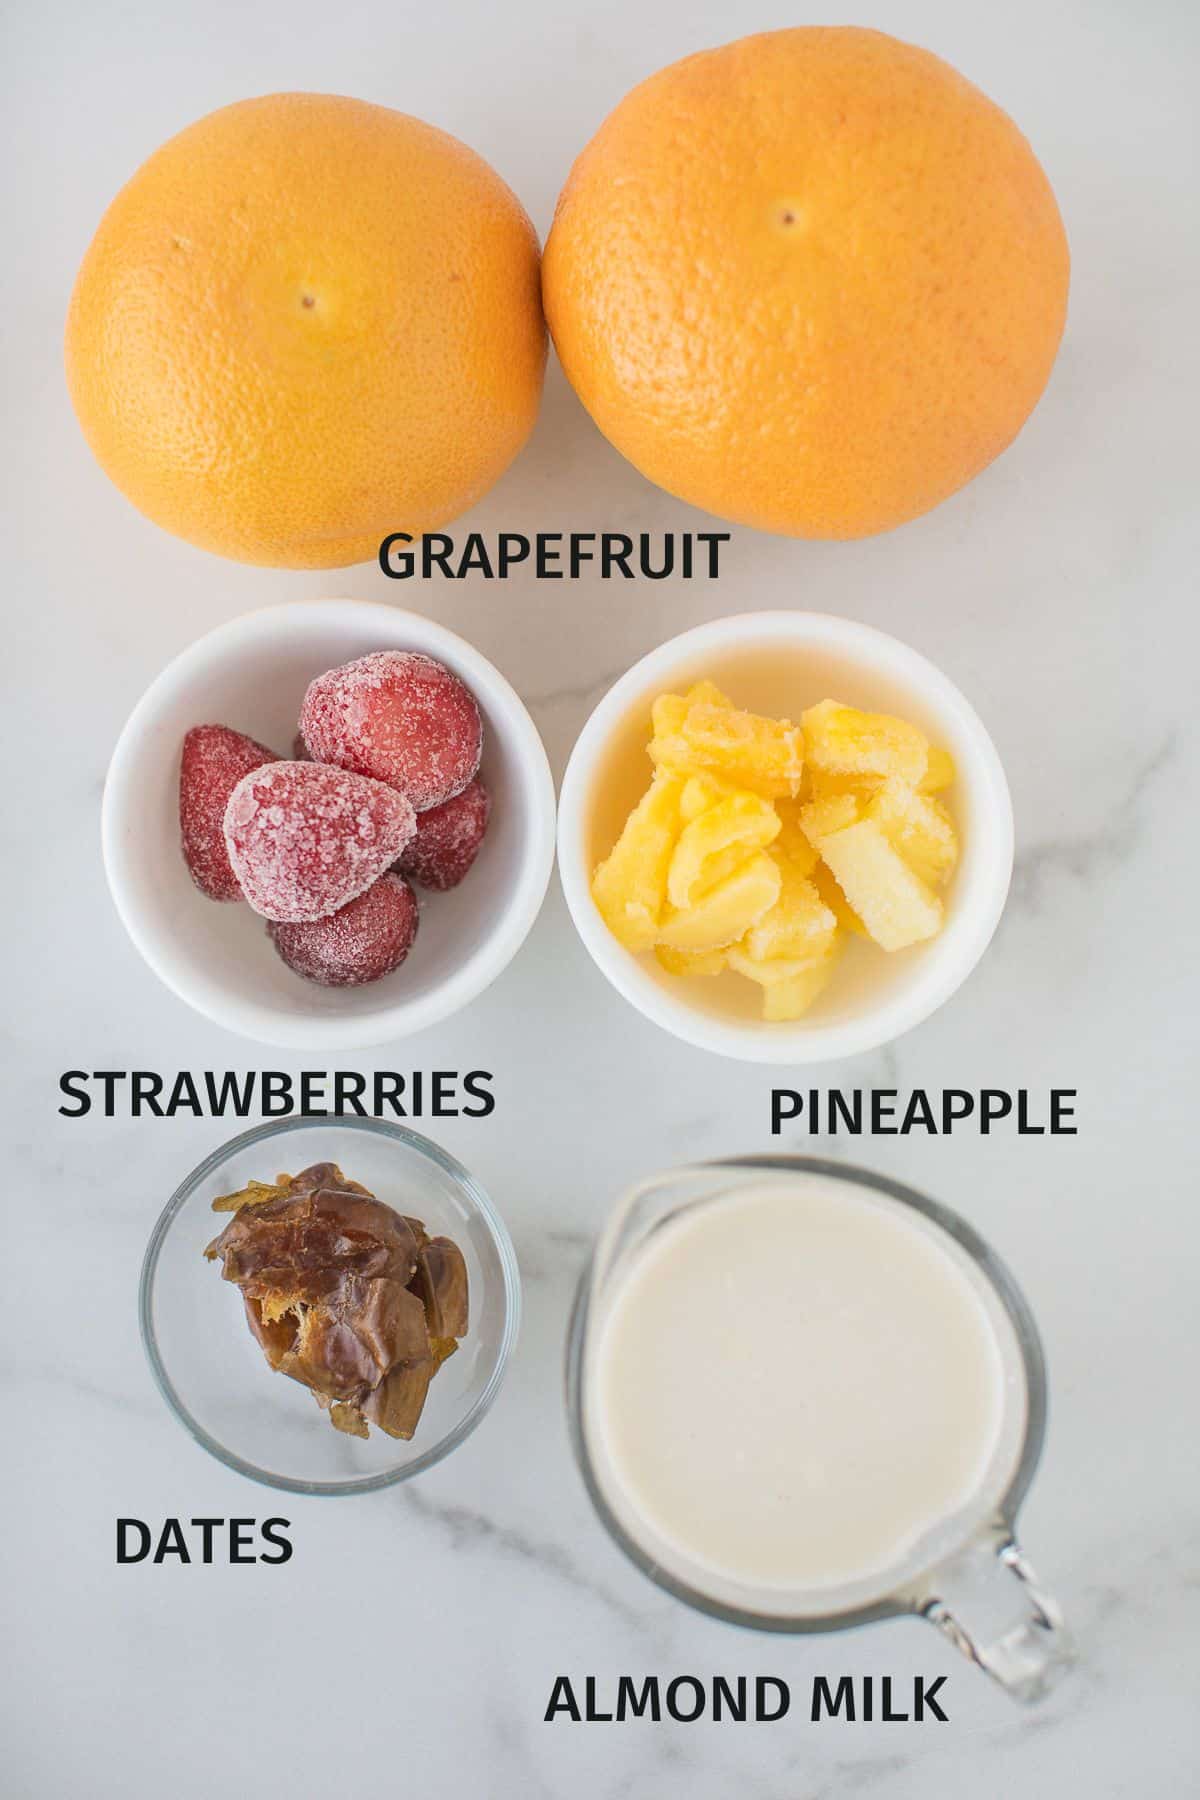 labeled ingredients for grapefruit smoothie.